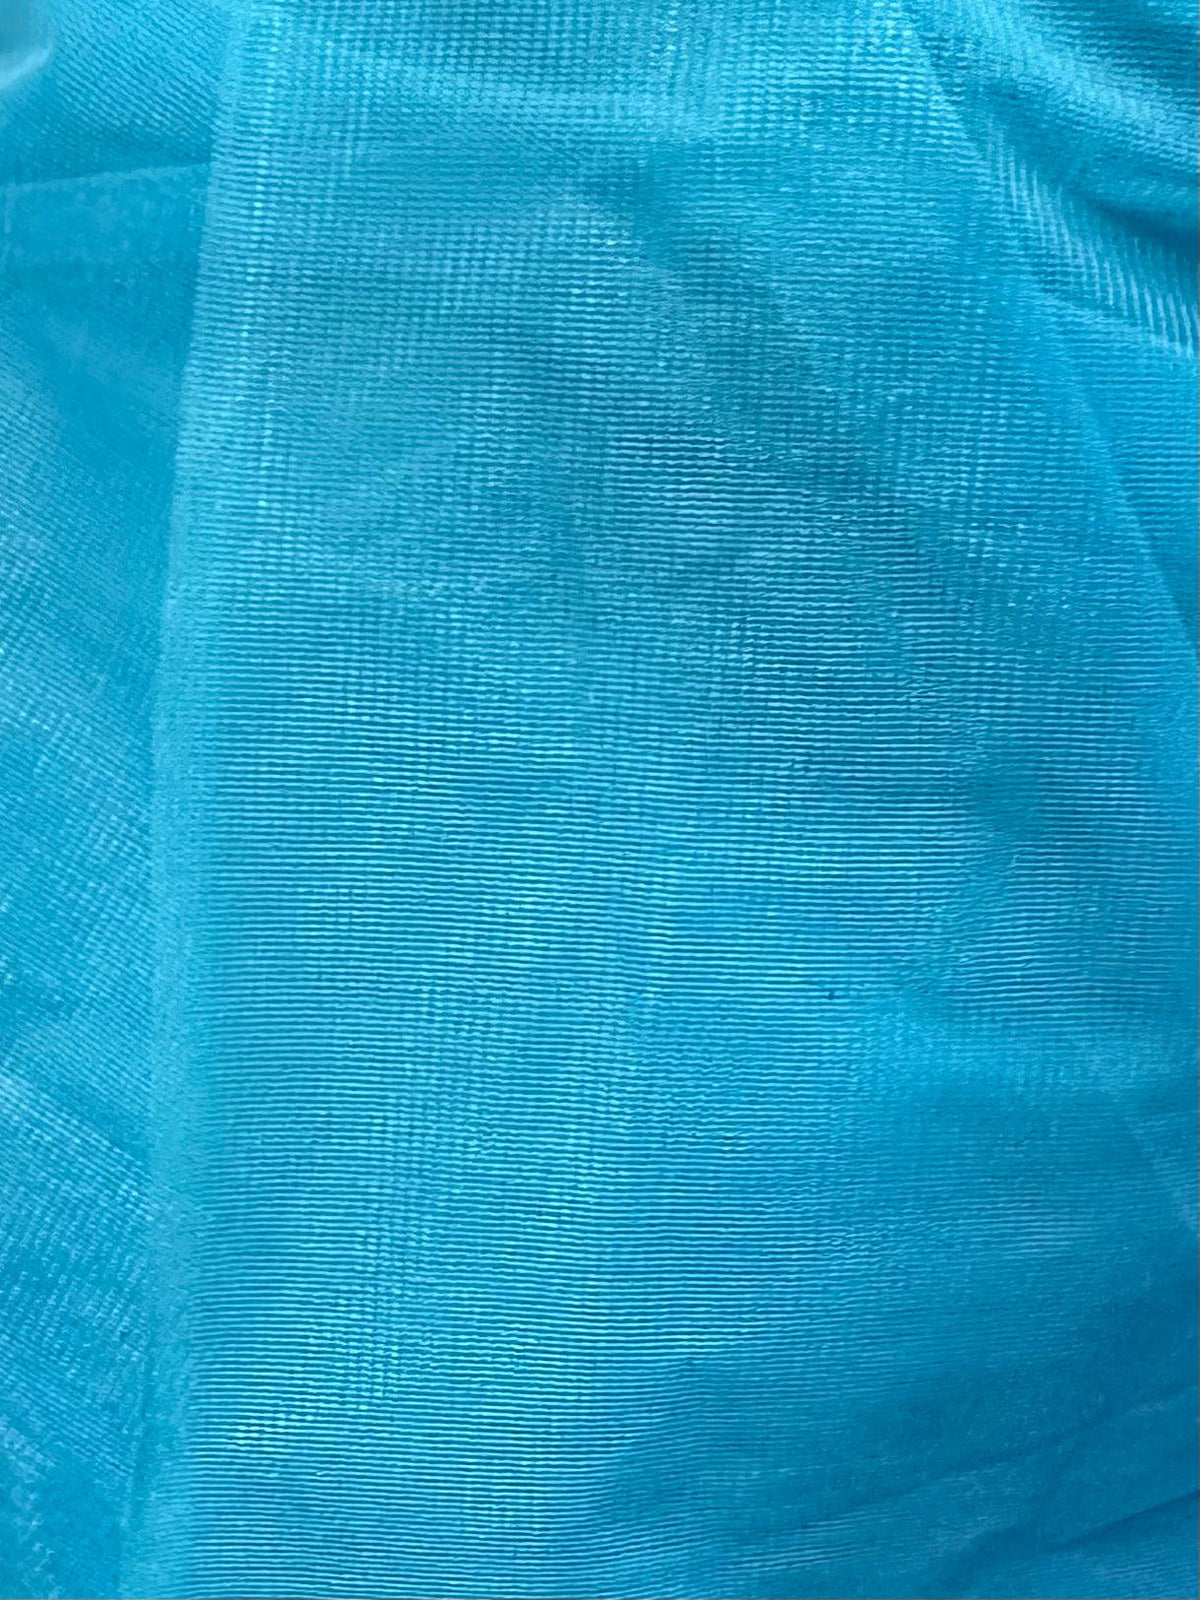 A close up image of a Square Up Fashions double layered slip in a blue nylon Organdy Stiff Petticoat fabric.